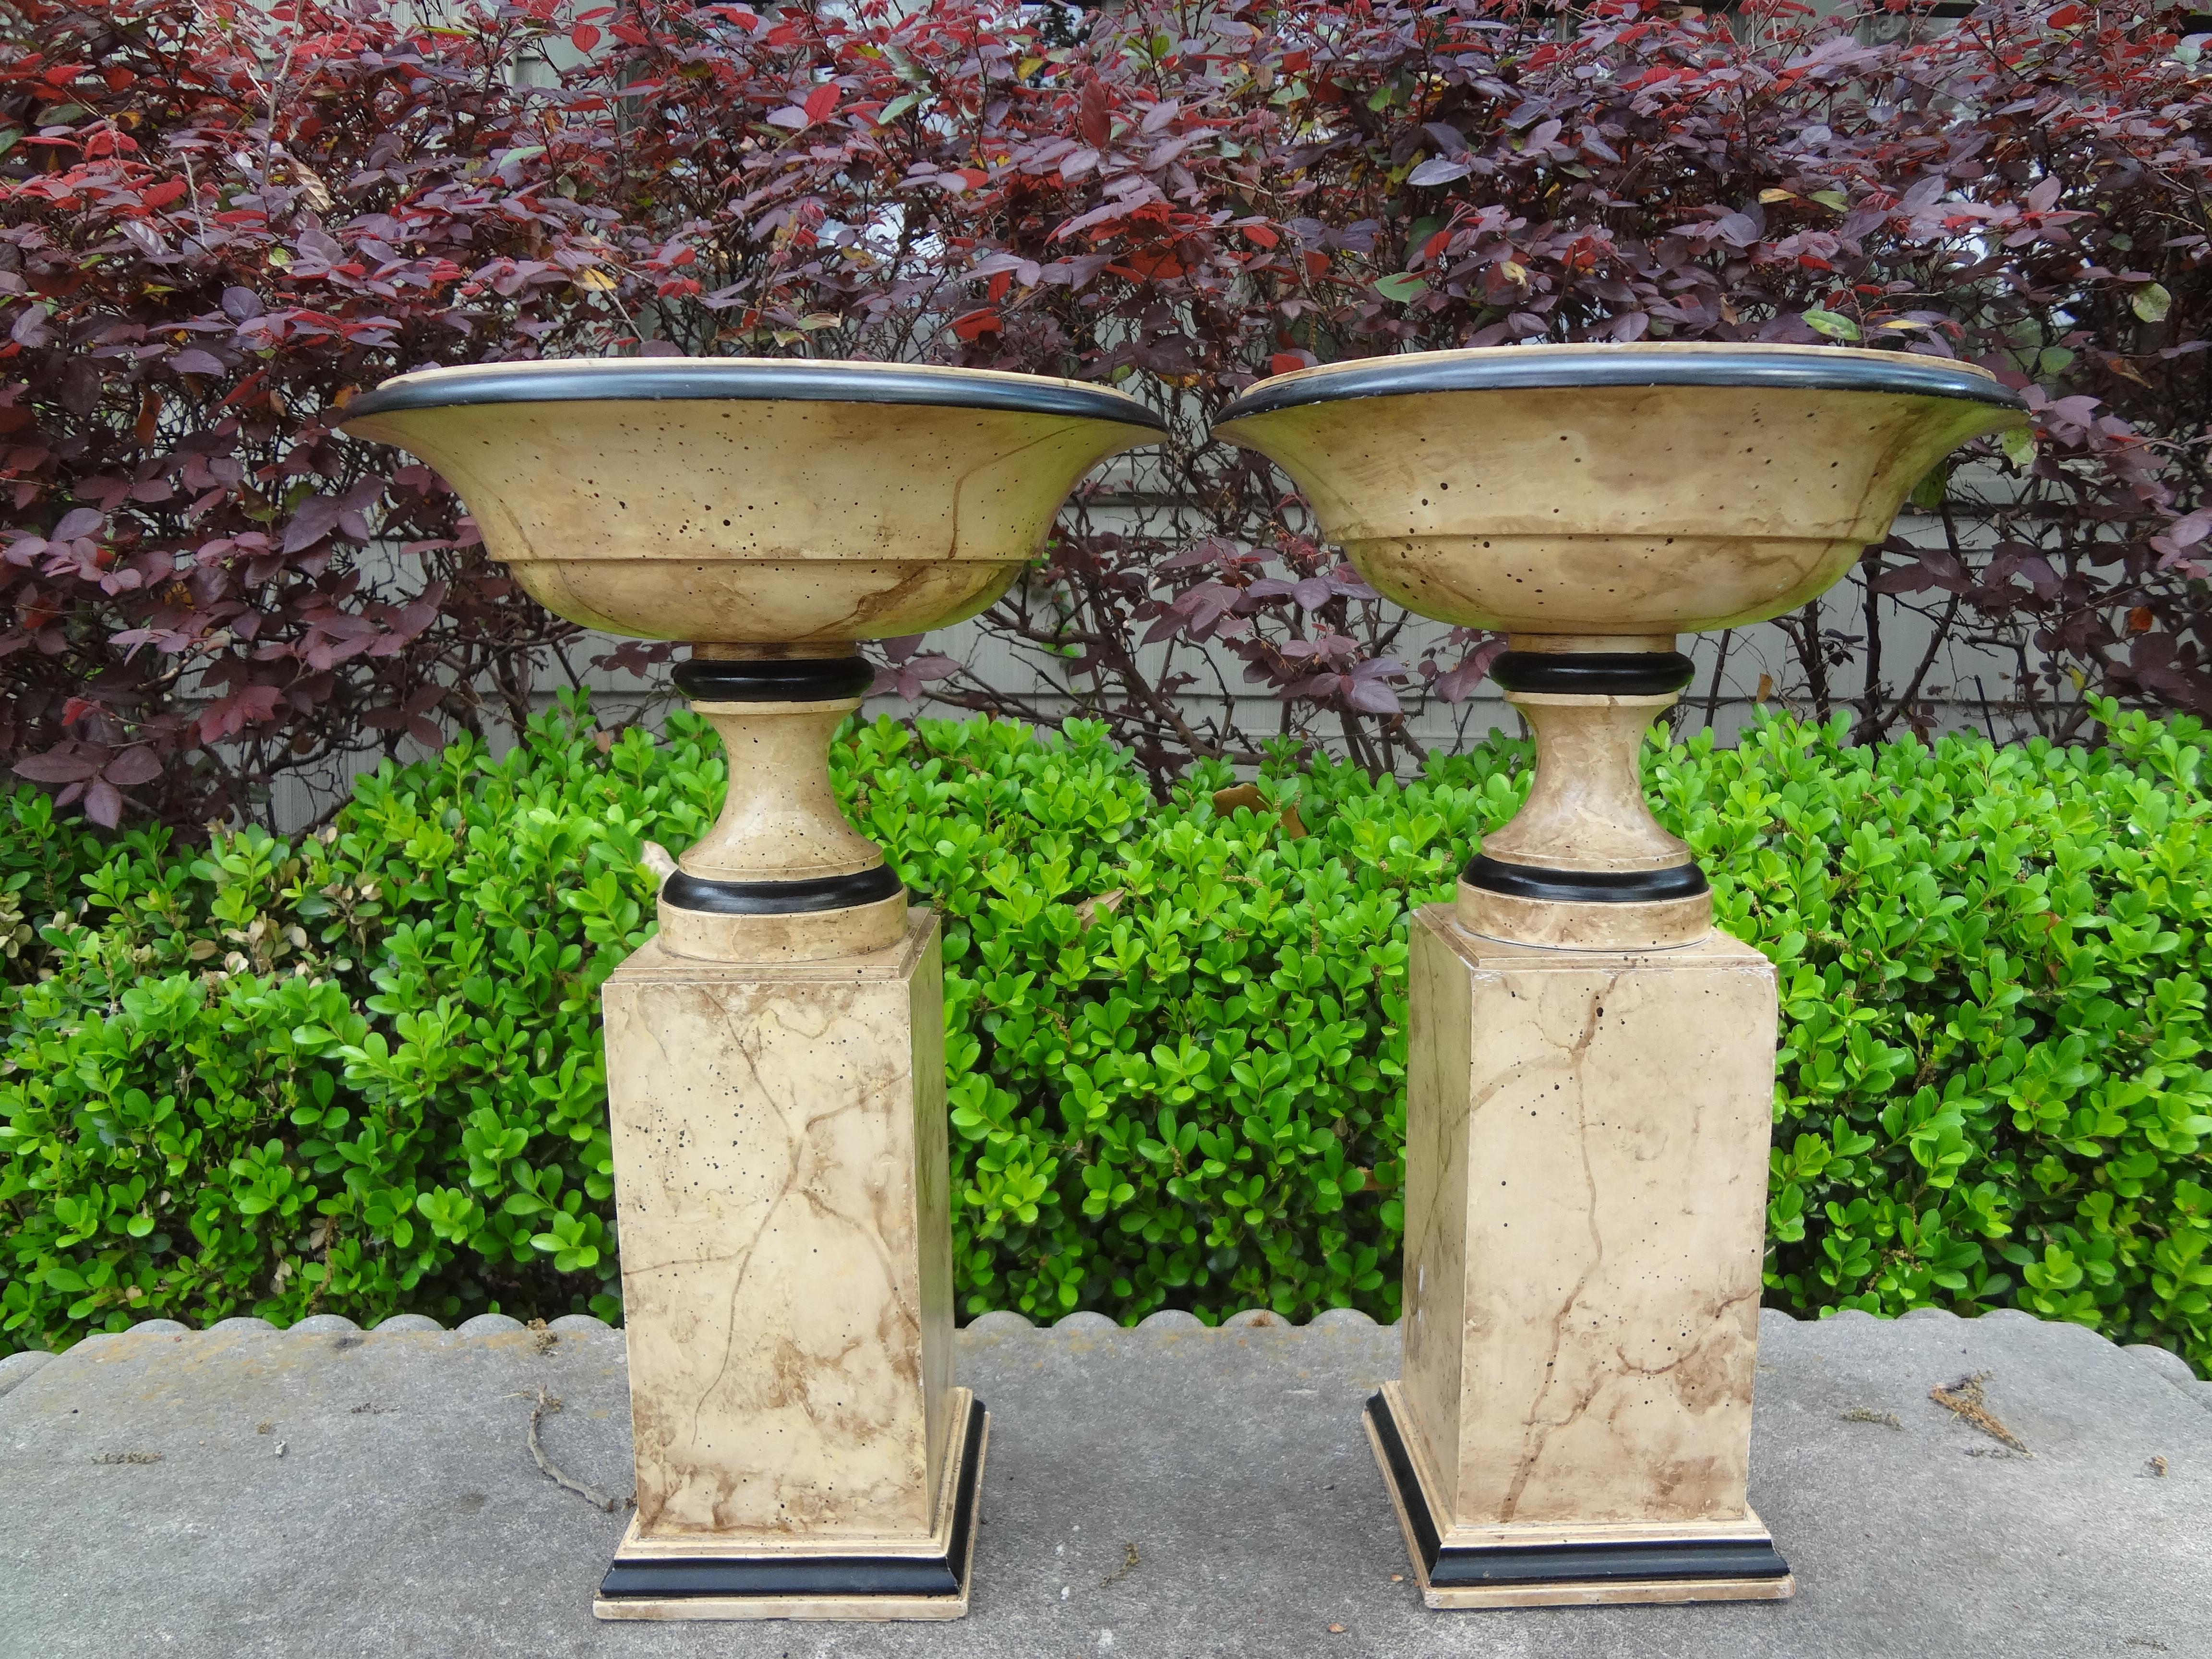 Stunning pair of Italian neoclassical style marbleized carved wood tazza urns. This beautiful pair of Italian urns or garniture are sitting on marbleized plinths and would look great on a mantle, dining table, cocktail table or in a bookcase.